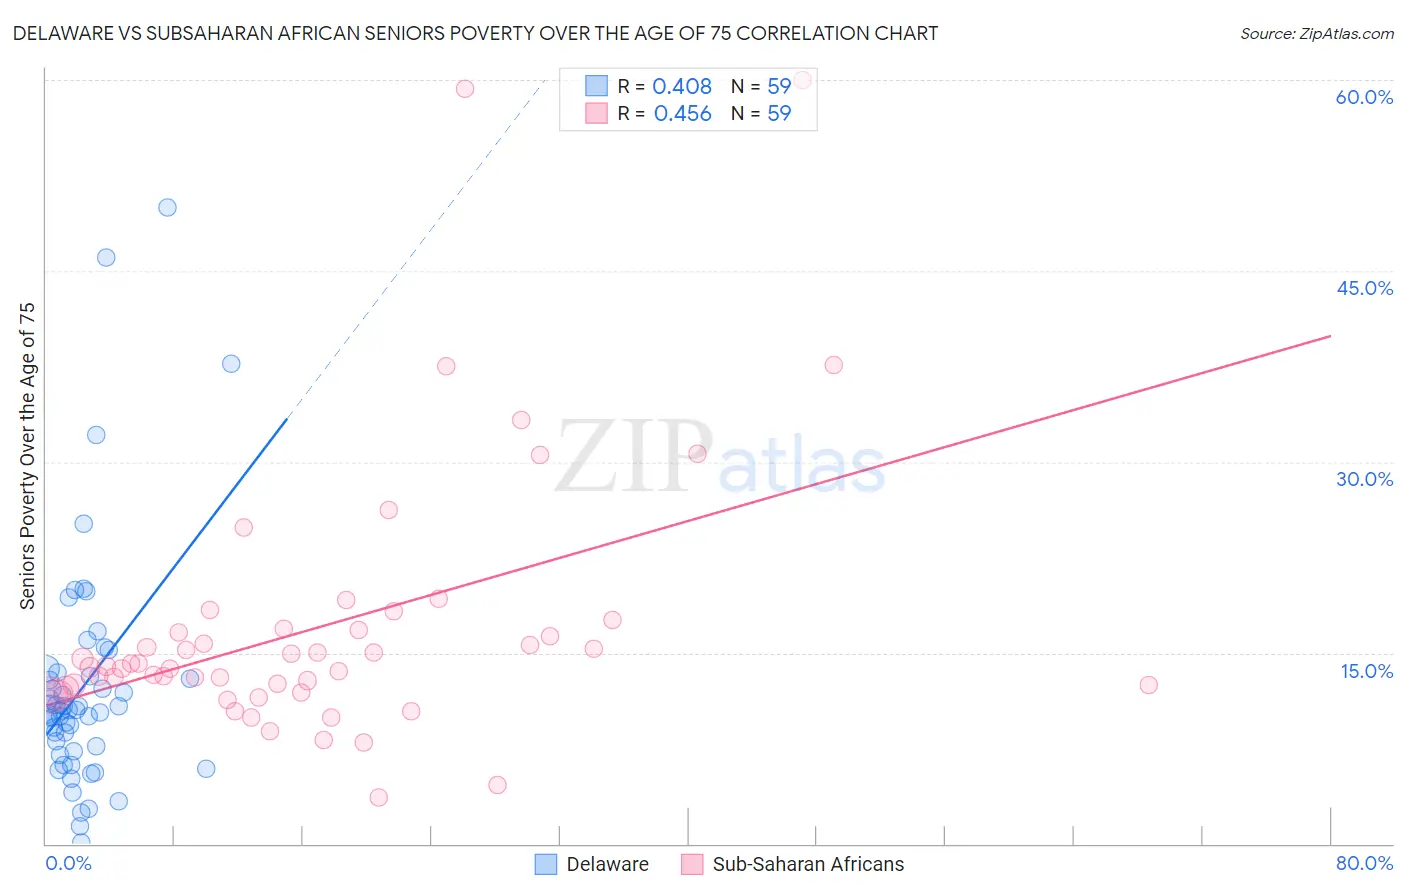 Delaware vs Subsaharan African Seniors Poverty Over the Age of 75